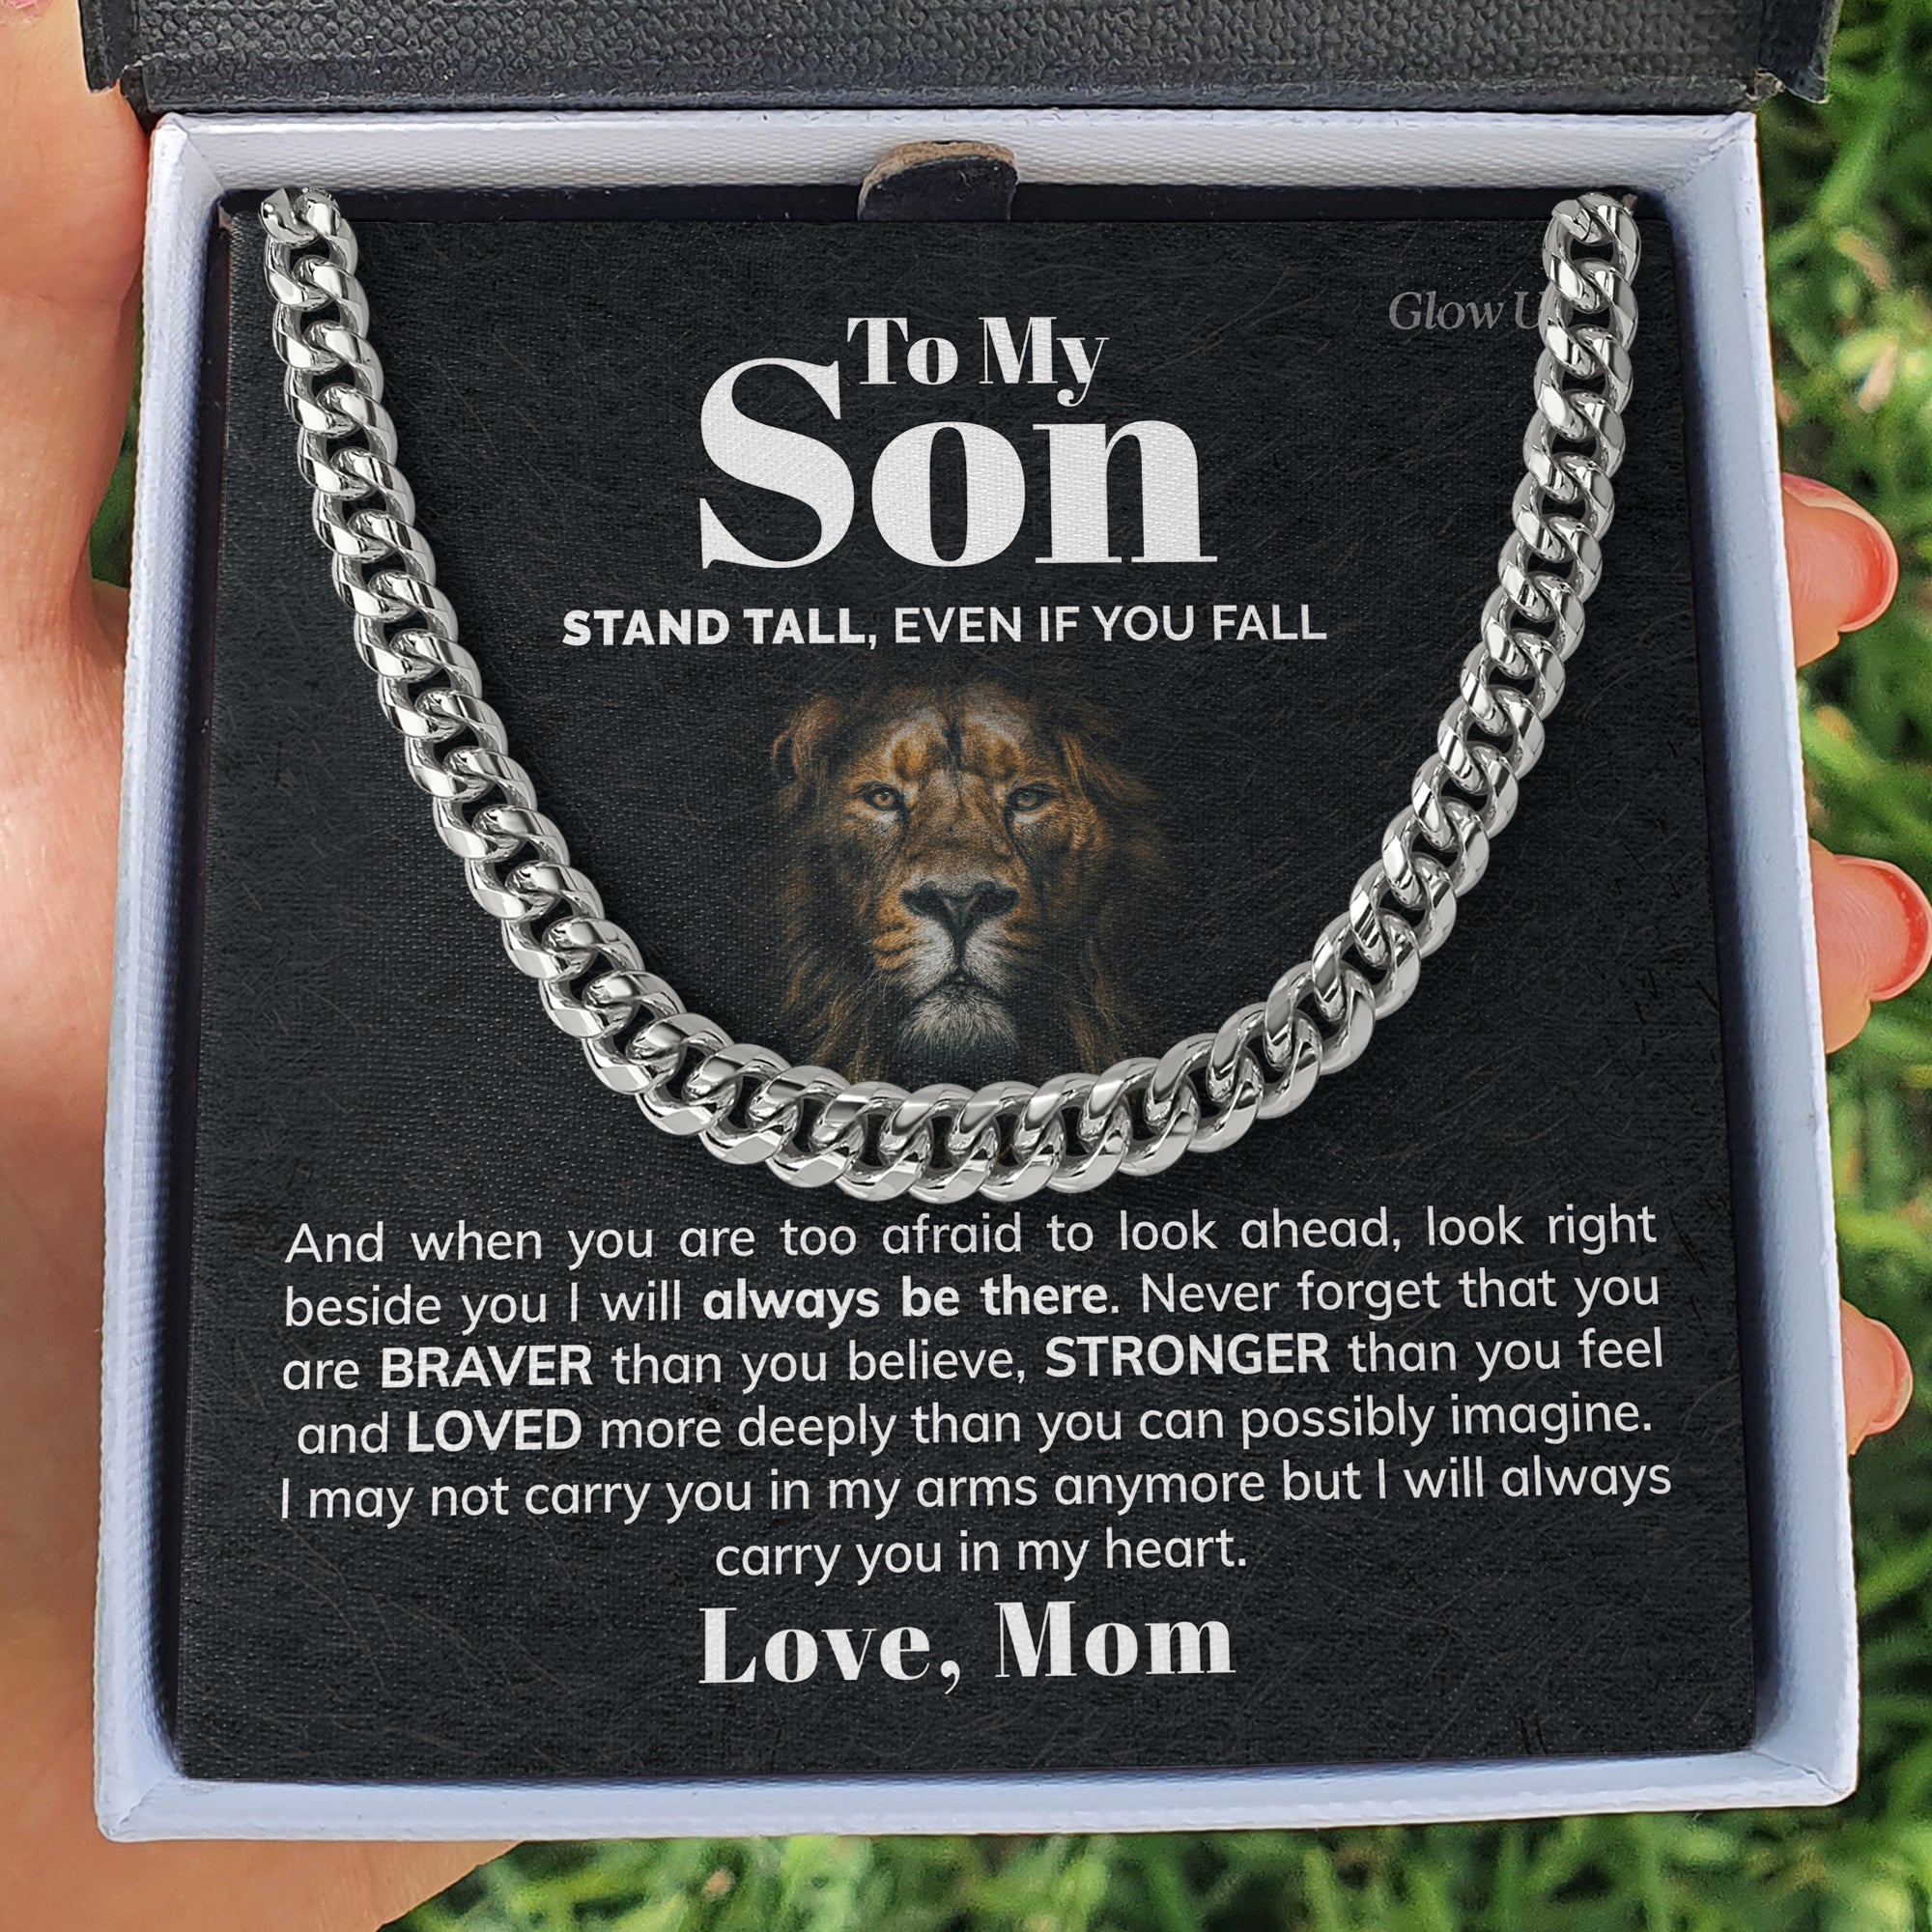 ShineOn Fulfillment Jewelry 316L Stainless Steel / Two-Toned Box To My Son - I carry you in my heart - Cuban Link Chain